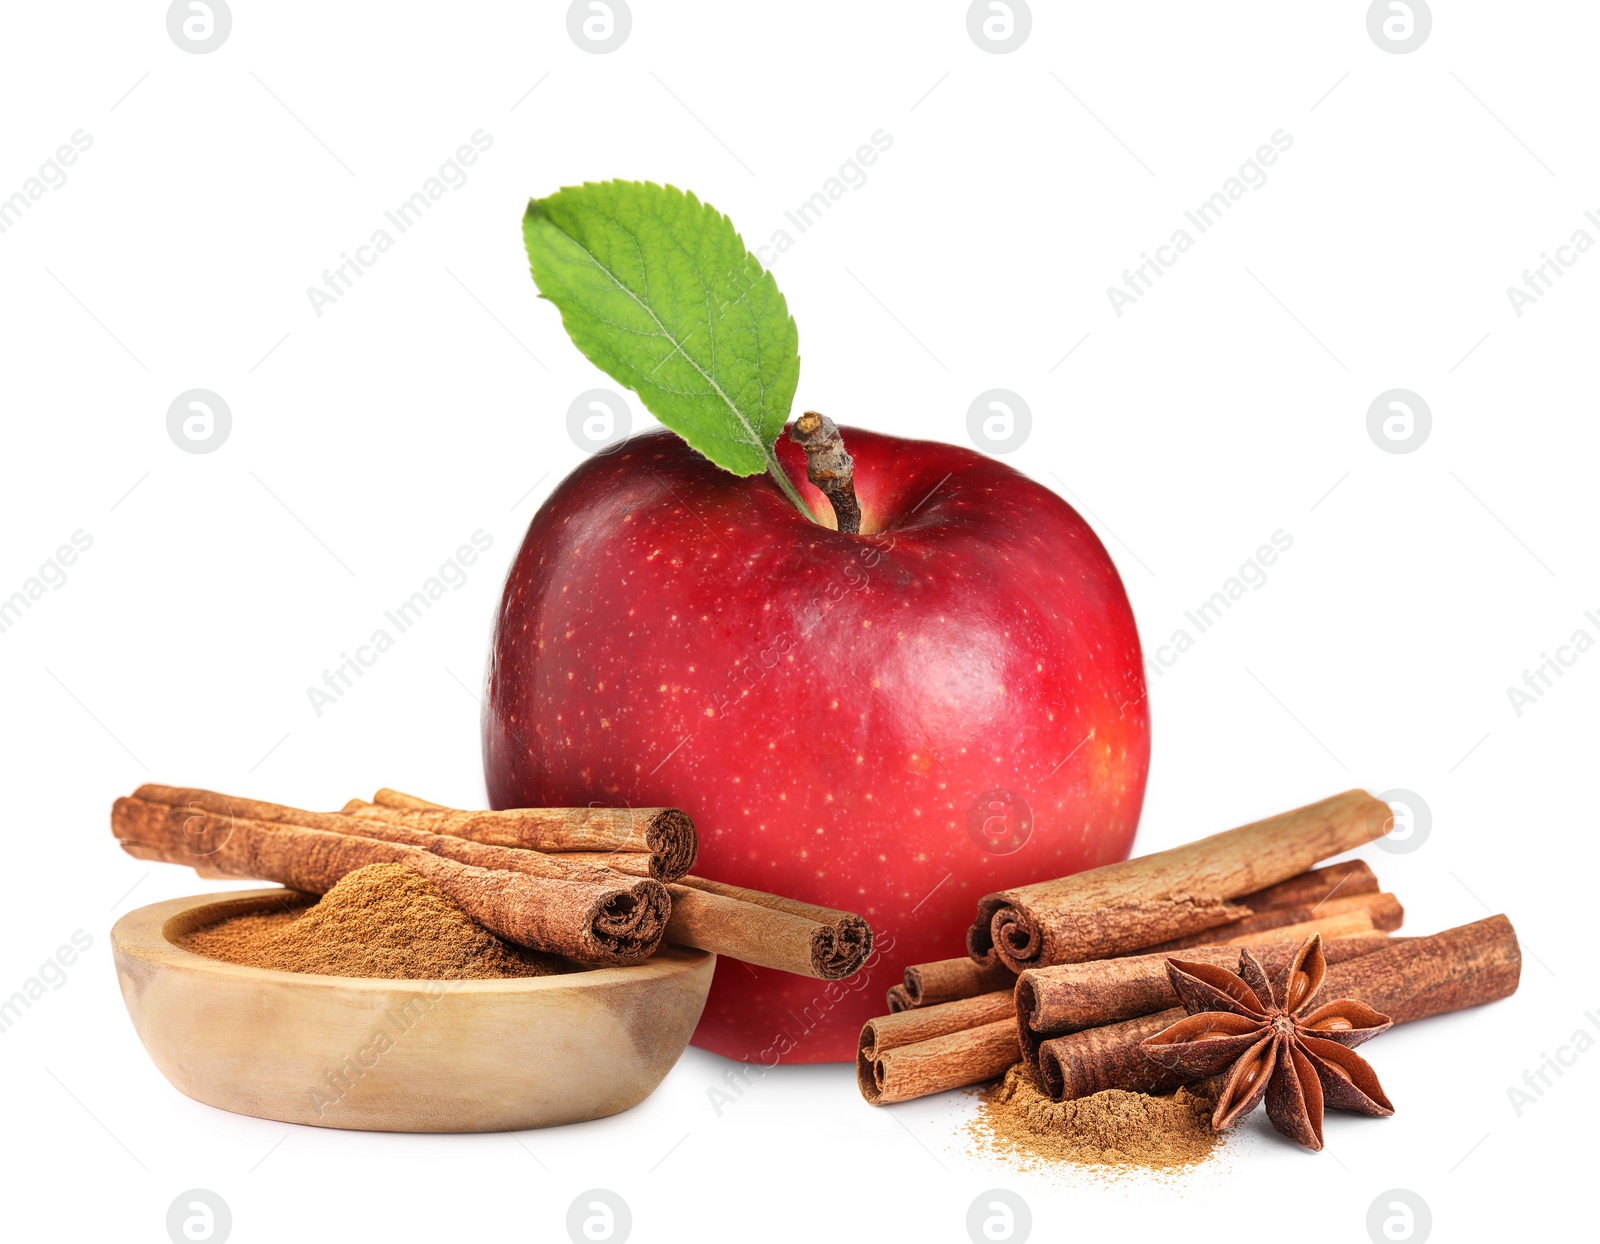 Image of Aromatic cinnamon sticks, powder, anise star and red apple isolated on white